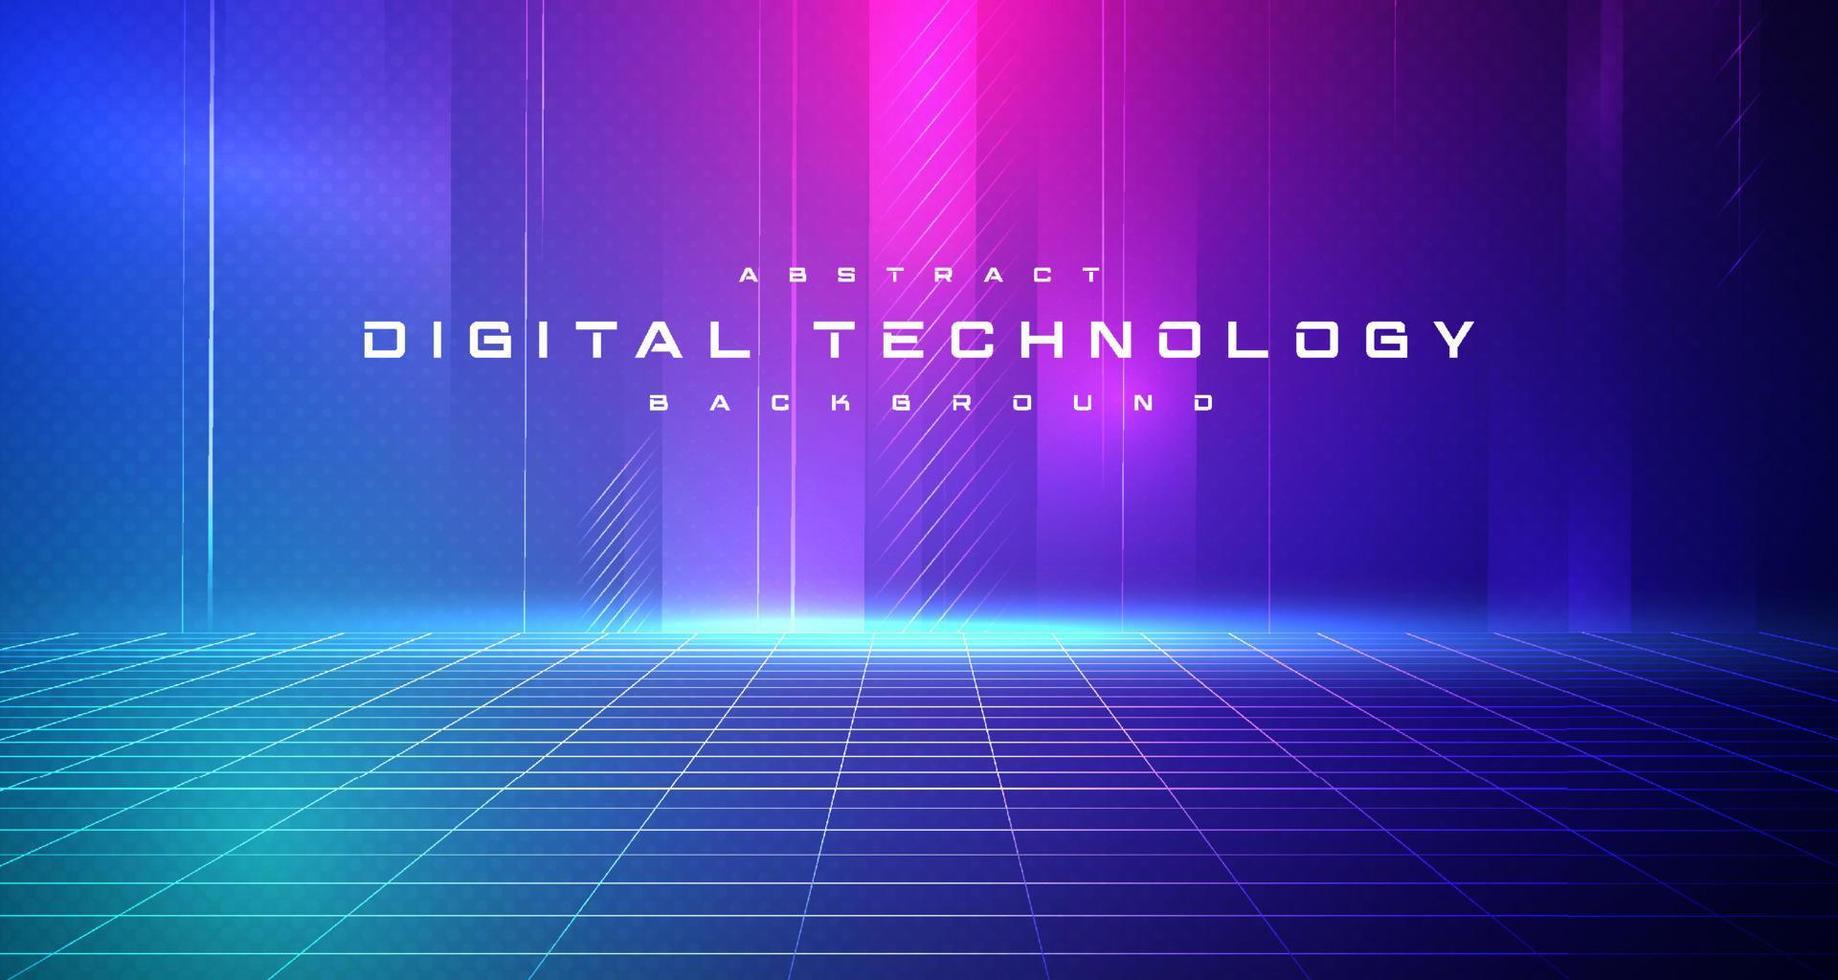 Digital technology metaverse neon blue pink background, cyber information, abstract speed connect communication, innovation future meta tech, internet network connection, Ai big data, illustration 3d vector